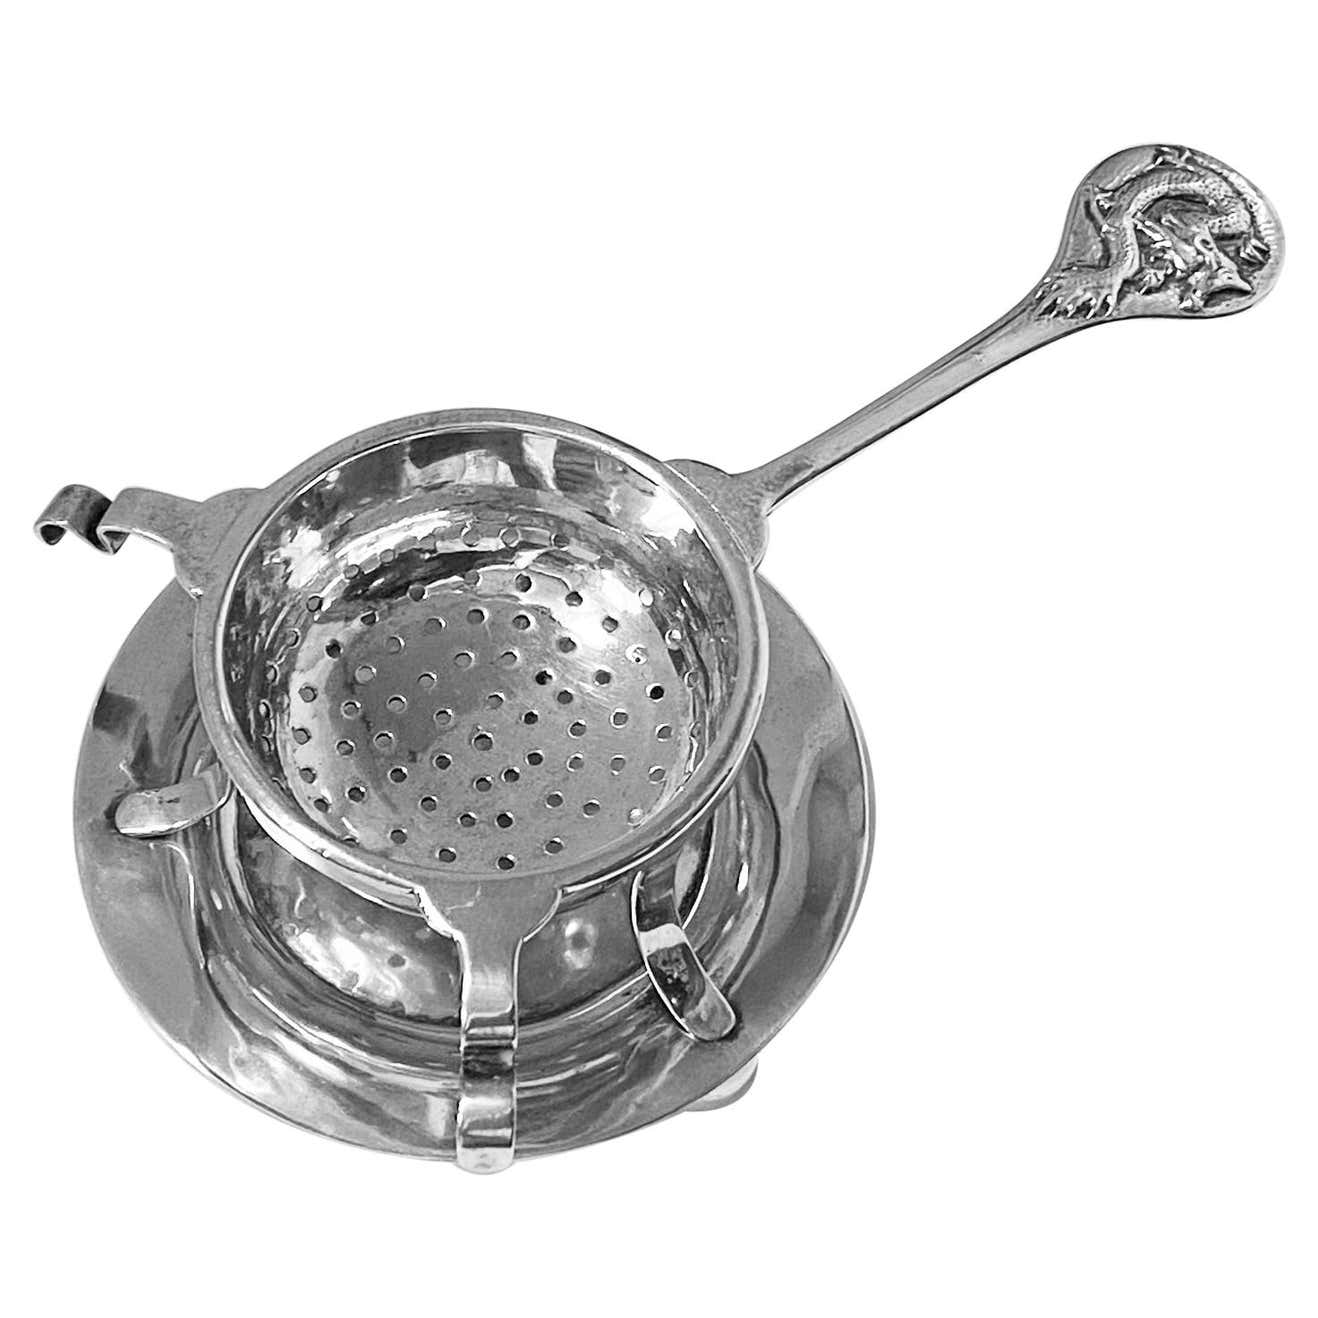 Chinese Export Silver Tea strainer on stand Tuck Chang C.1900